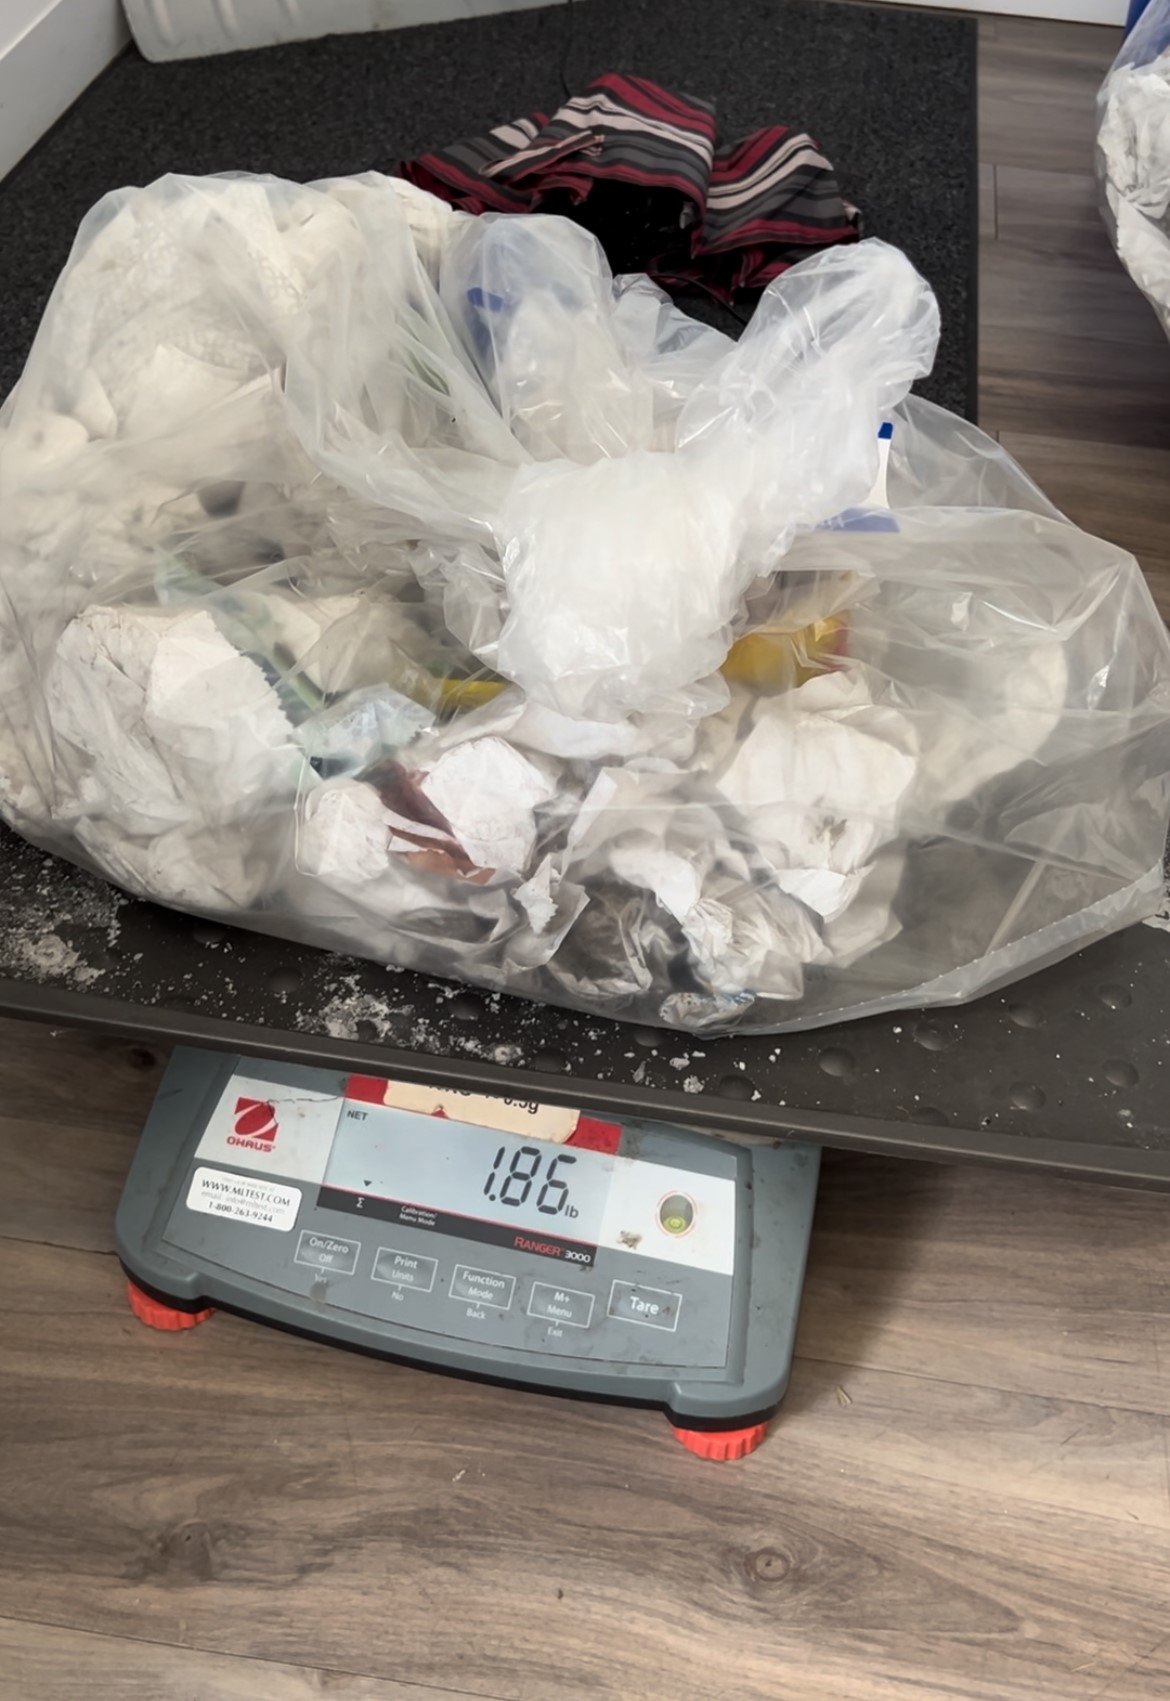 A scale weight waste collected during a waste audit